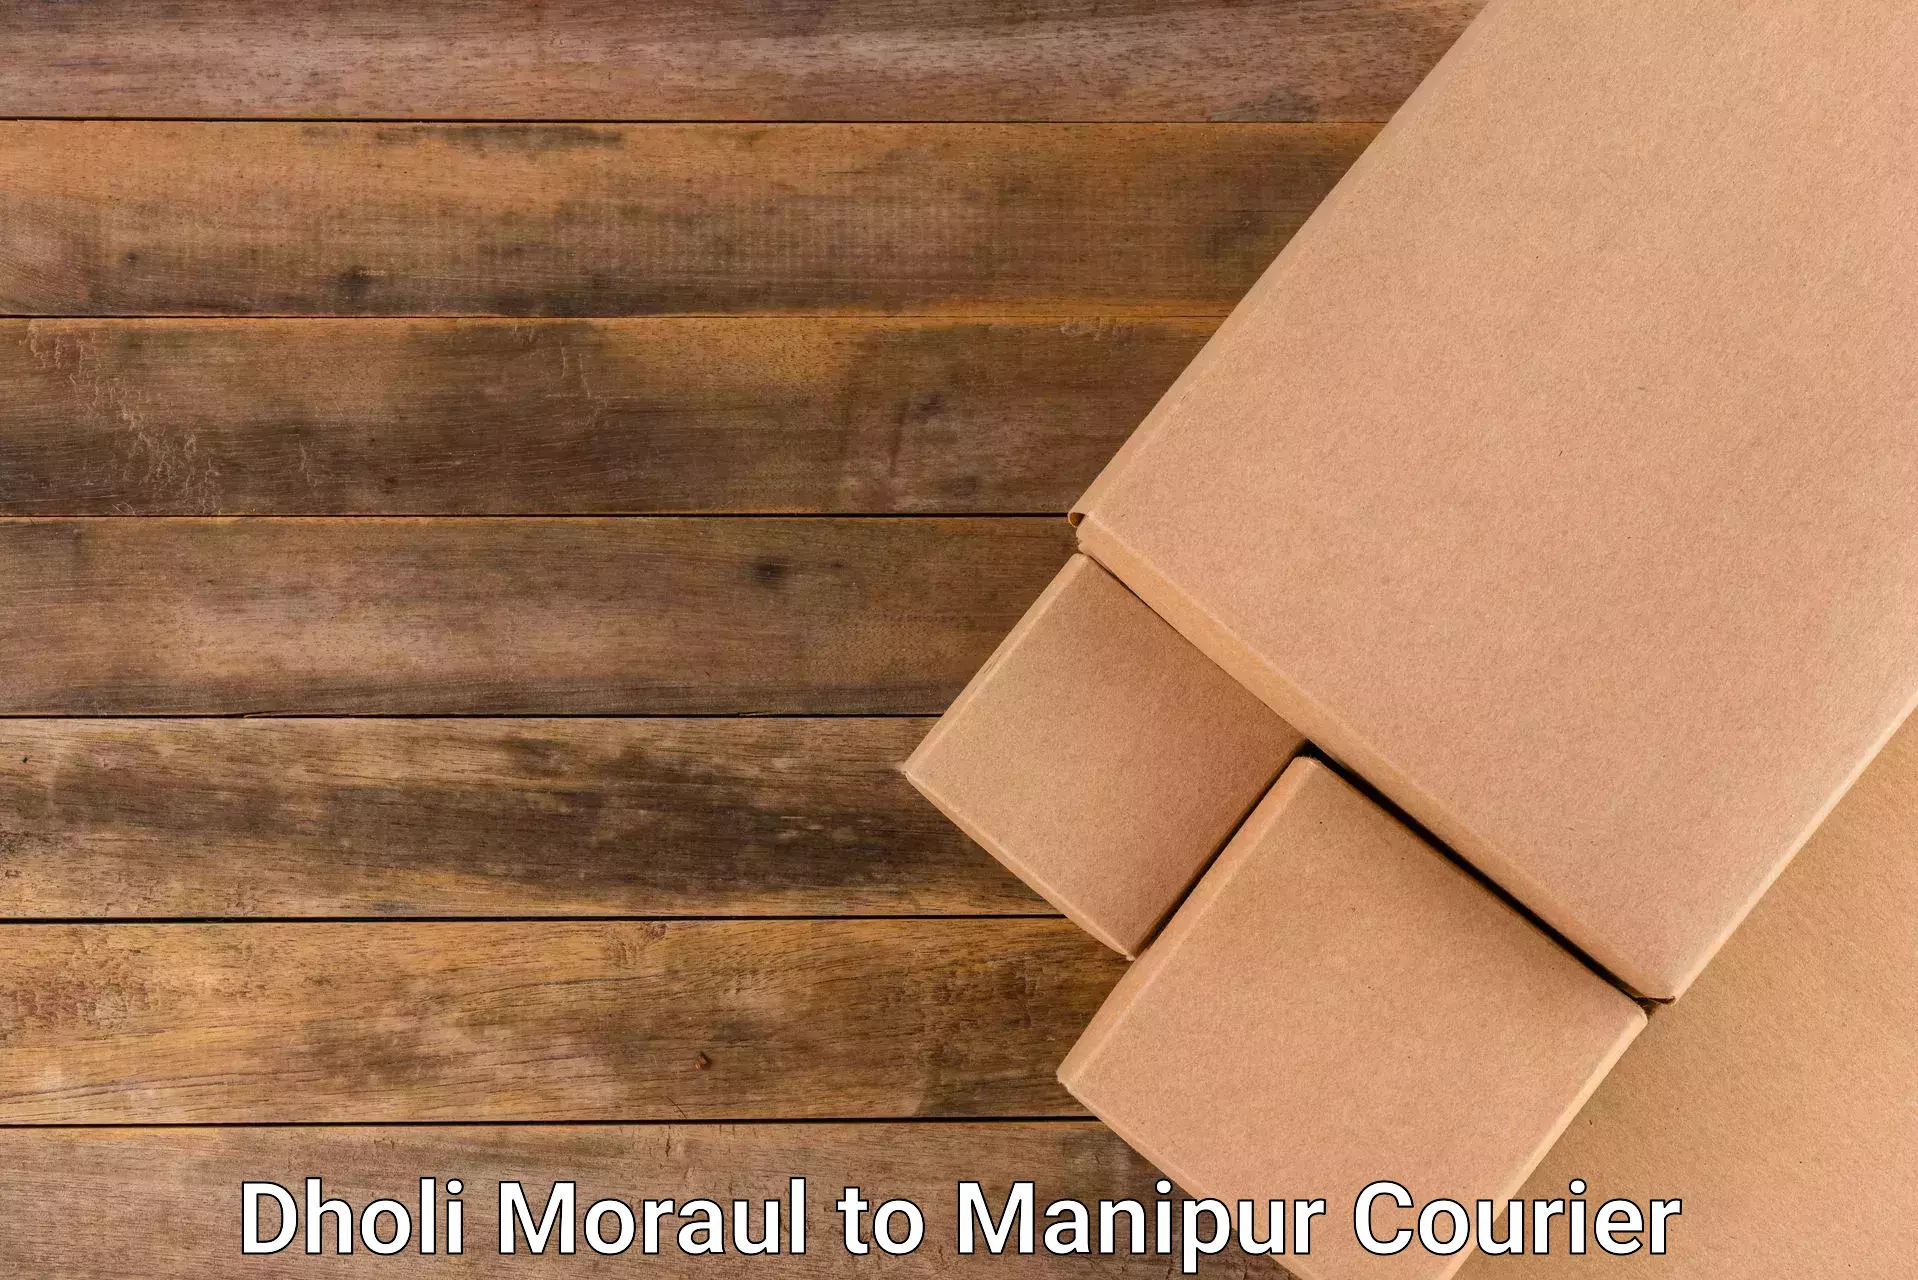 24-hour courier service Dholi Moraul to Imphal